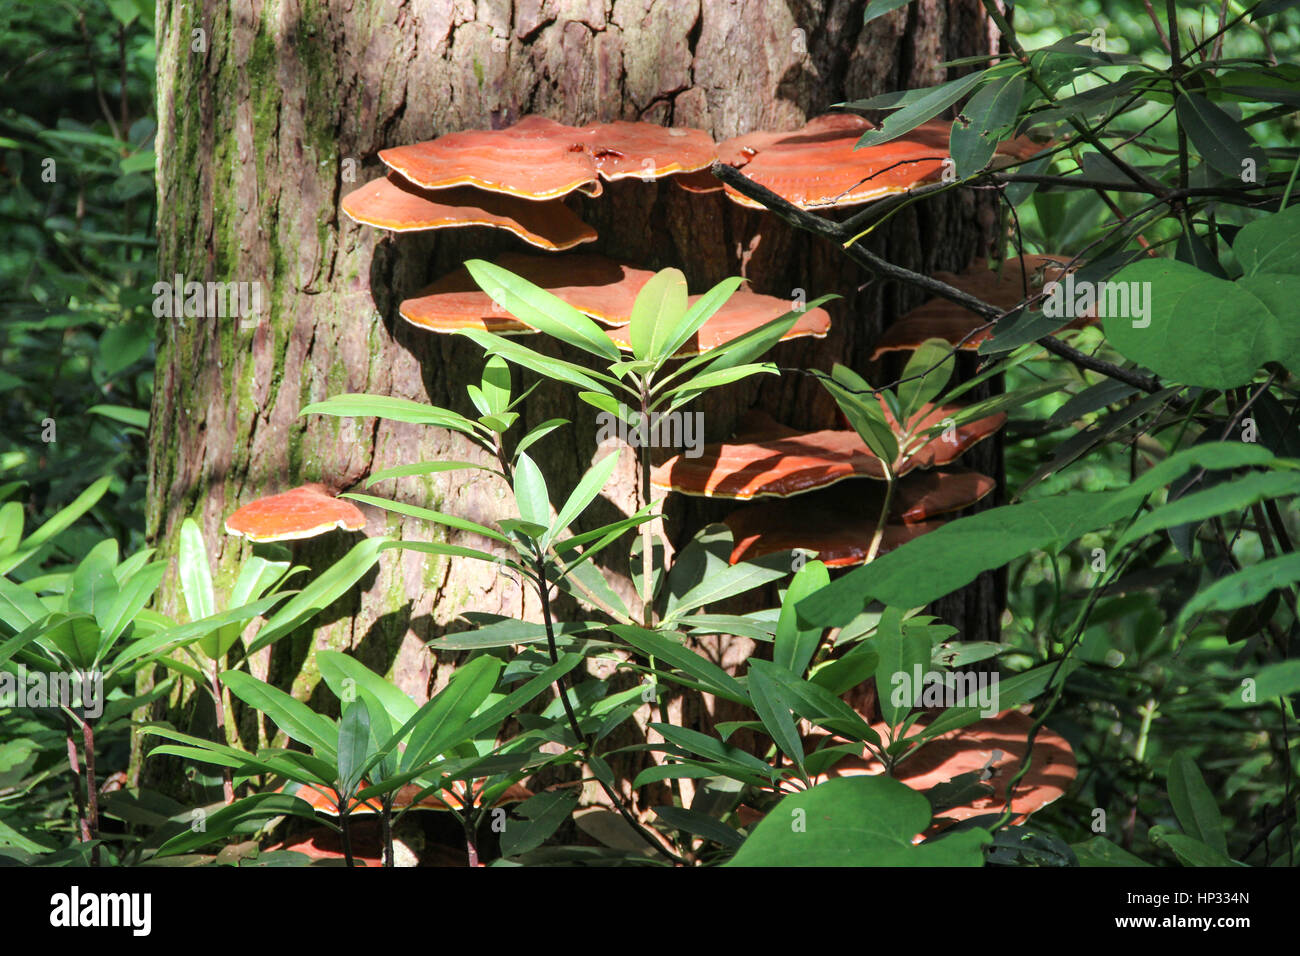 Shelf fungus on tree in Smoky Mountains National Park in Tennessee Stock Photo